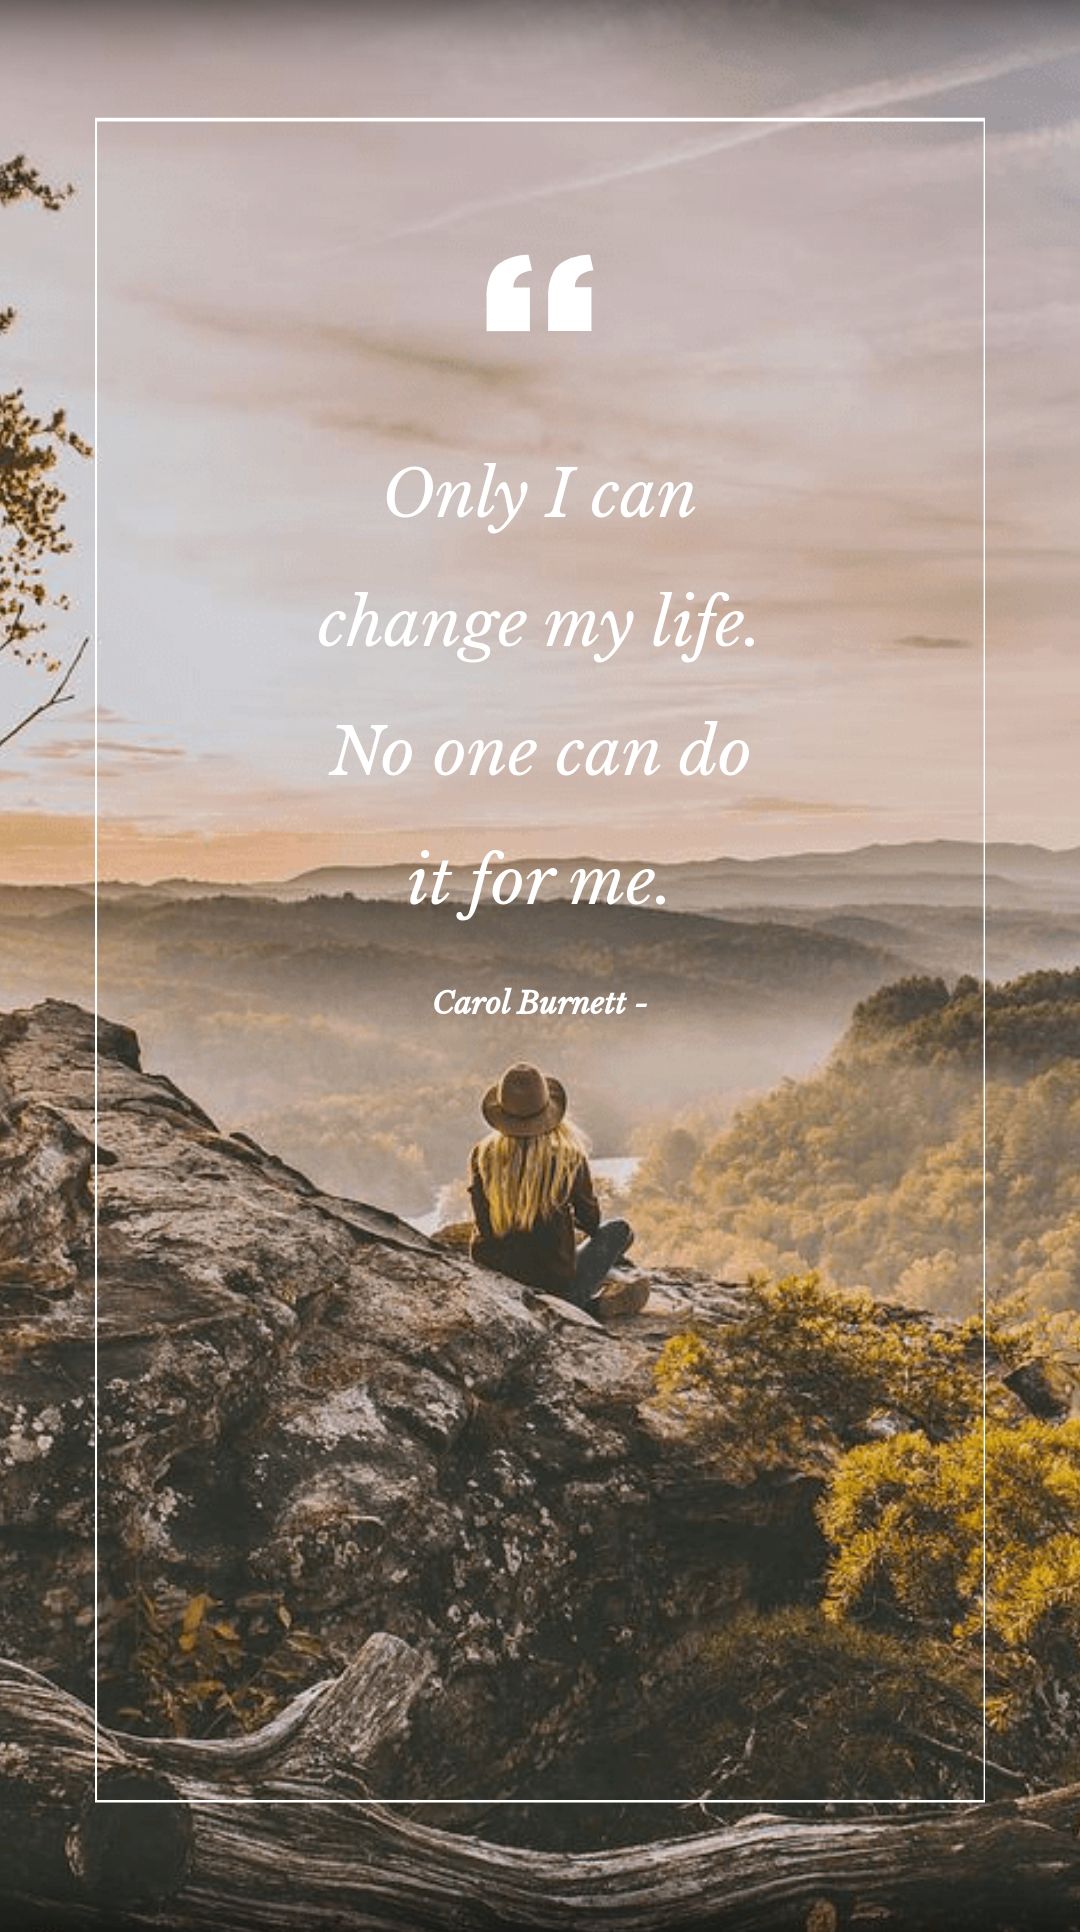 Carol Burnett - Only I can change my life. No one can do it for me.